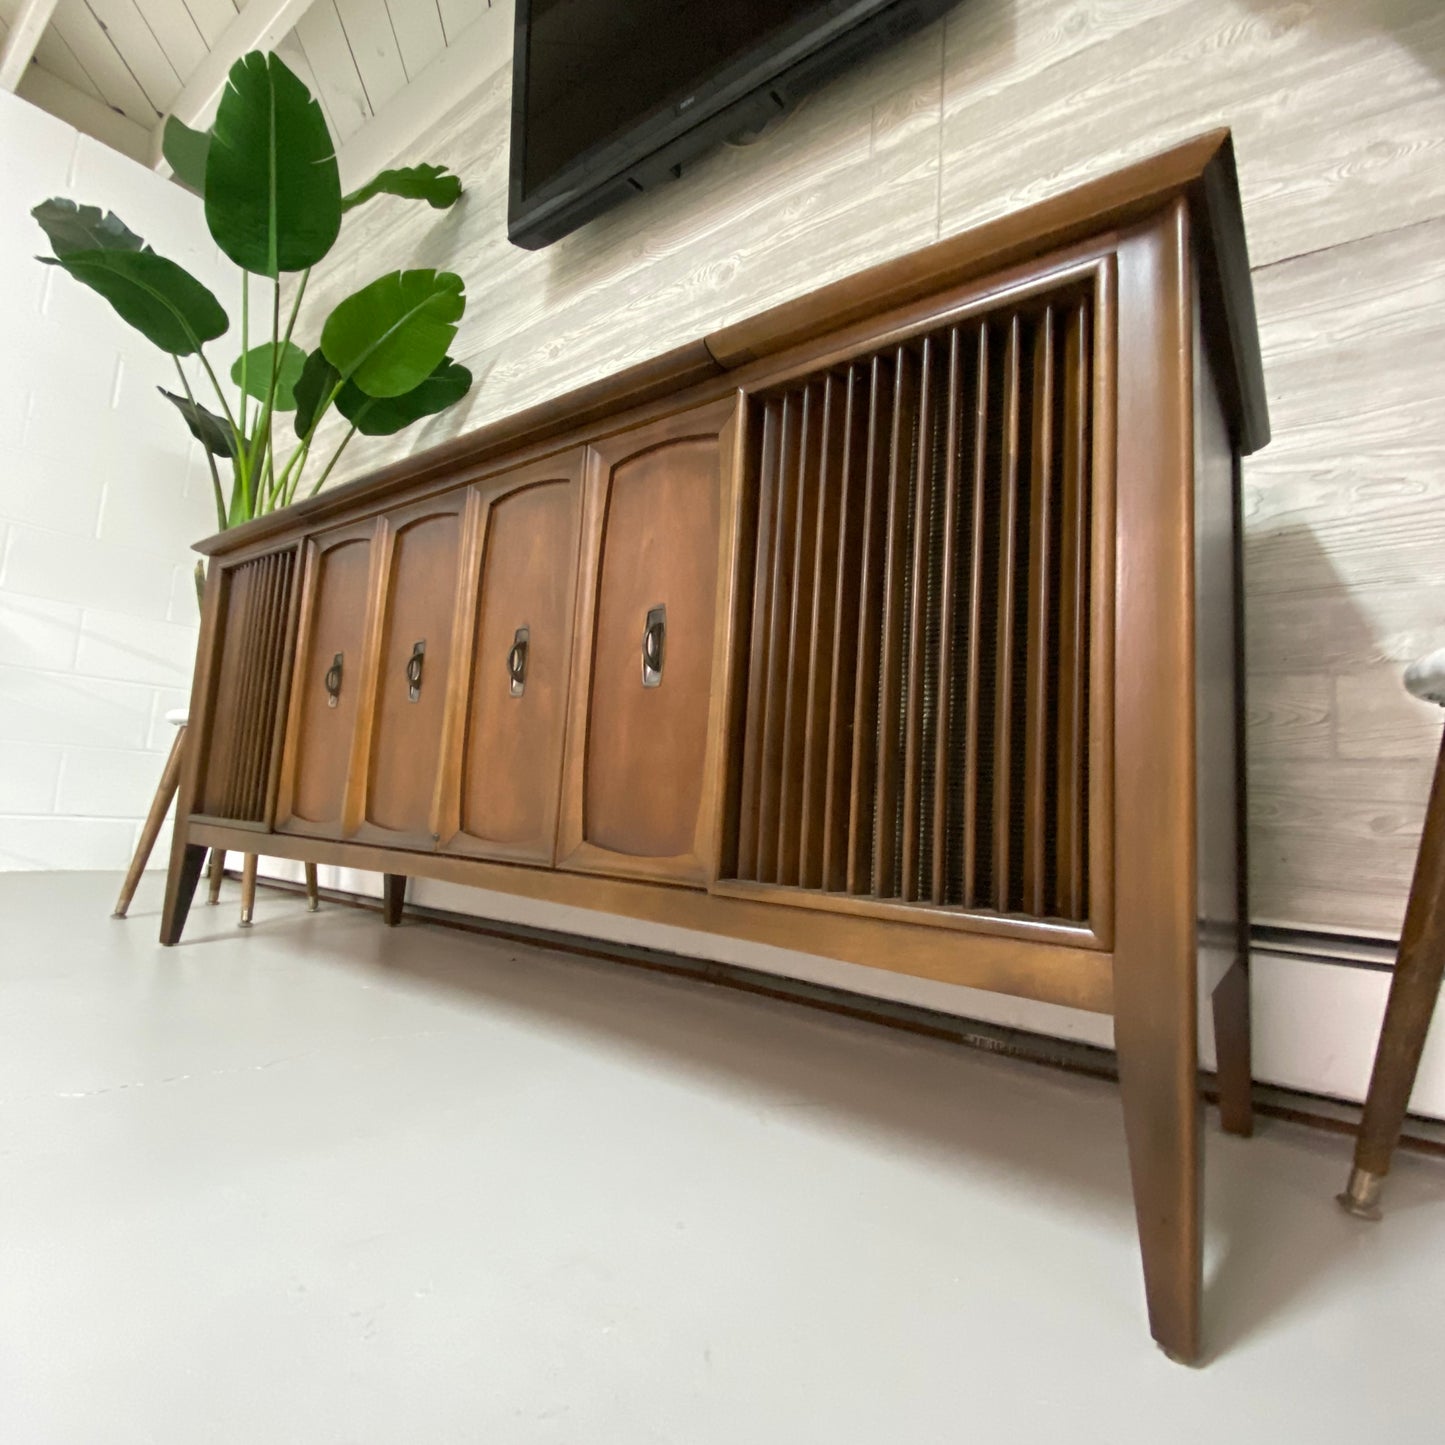 **SOLD OUT**  ZENITH 60s Mid Century Stereo Console Record Player AM FM Bluetooth Alexa The Vintedge Co.